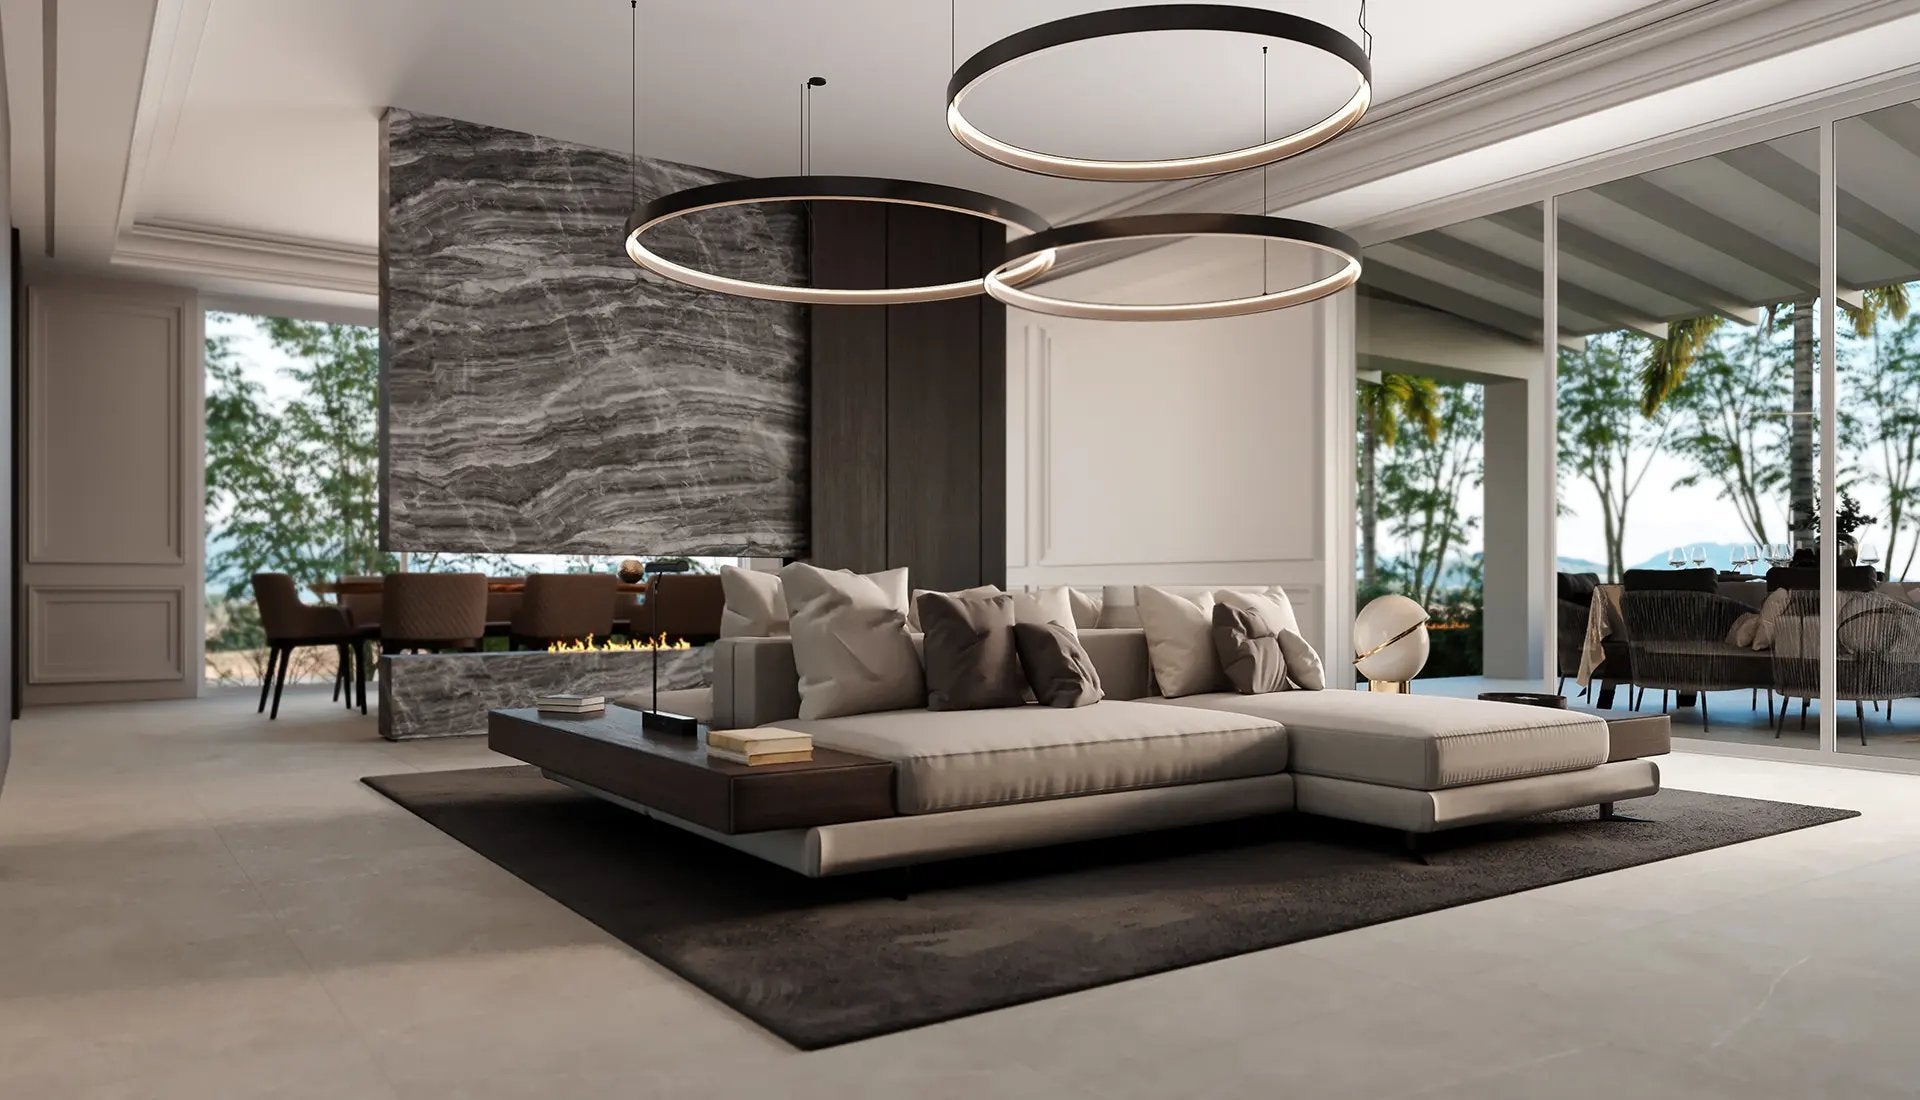 Modern living room featuring Anatolia Mjork porcelain tile collection with elegant marble design, showcasing stylish furniture and contemporary lighting fixtures